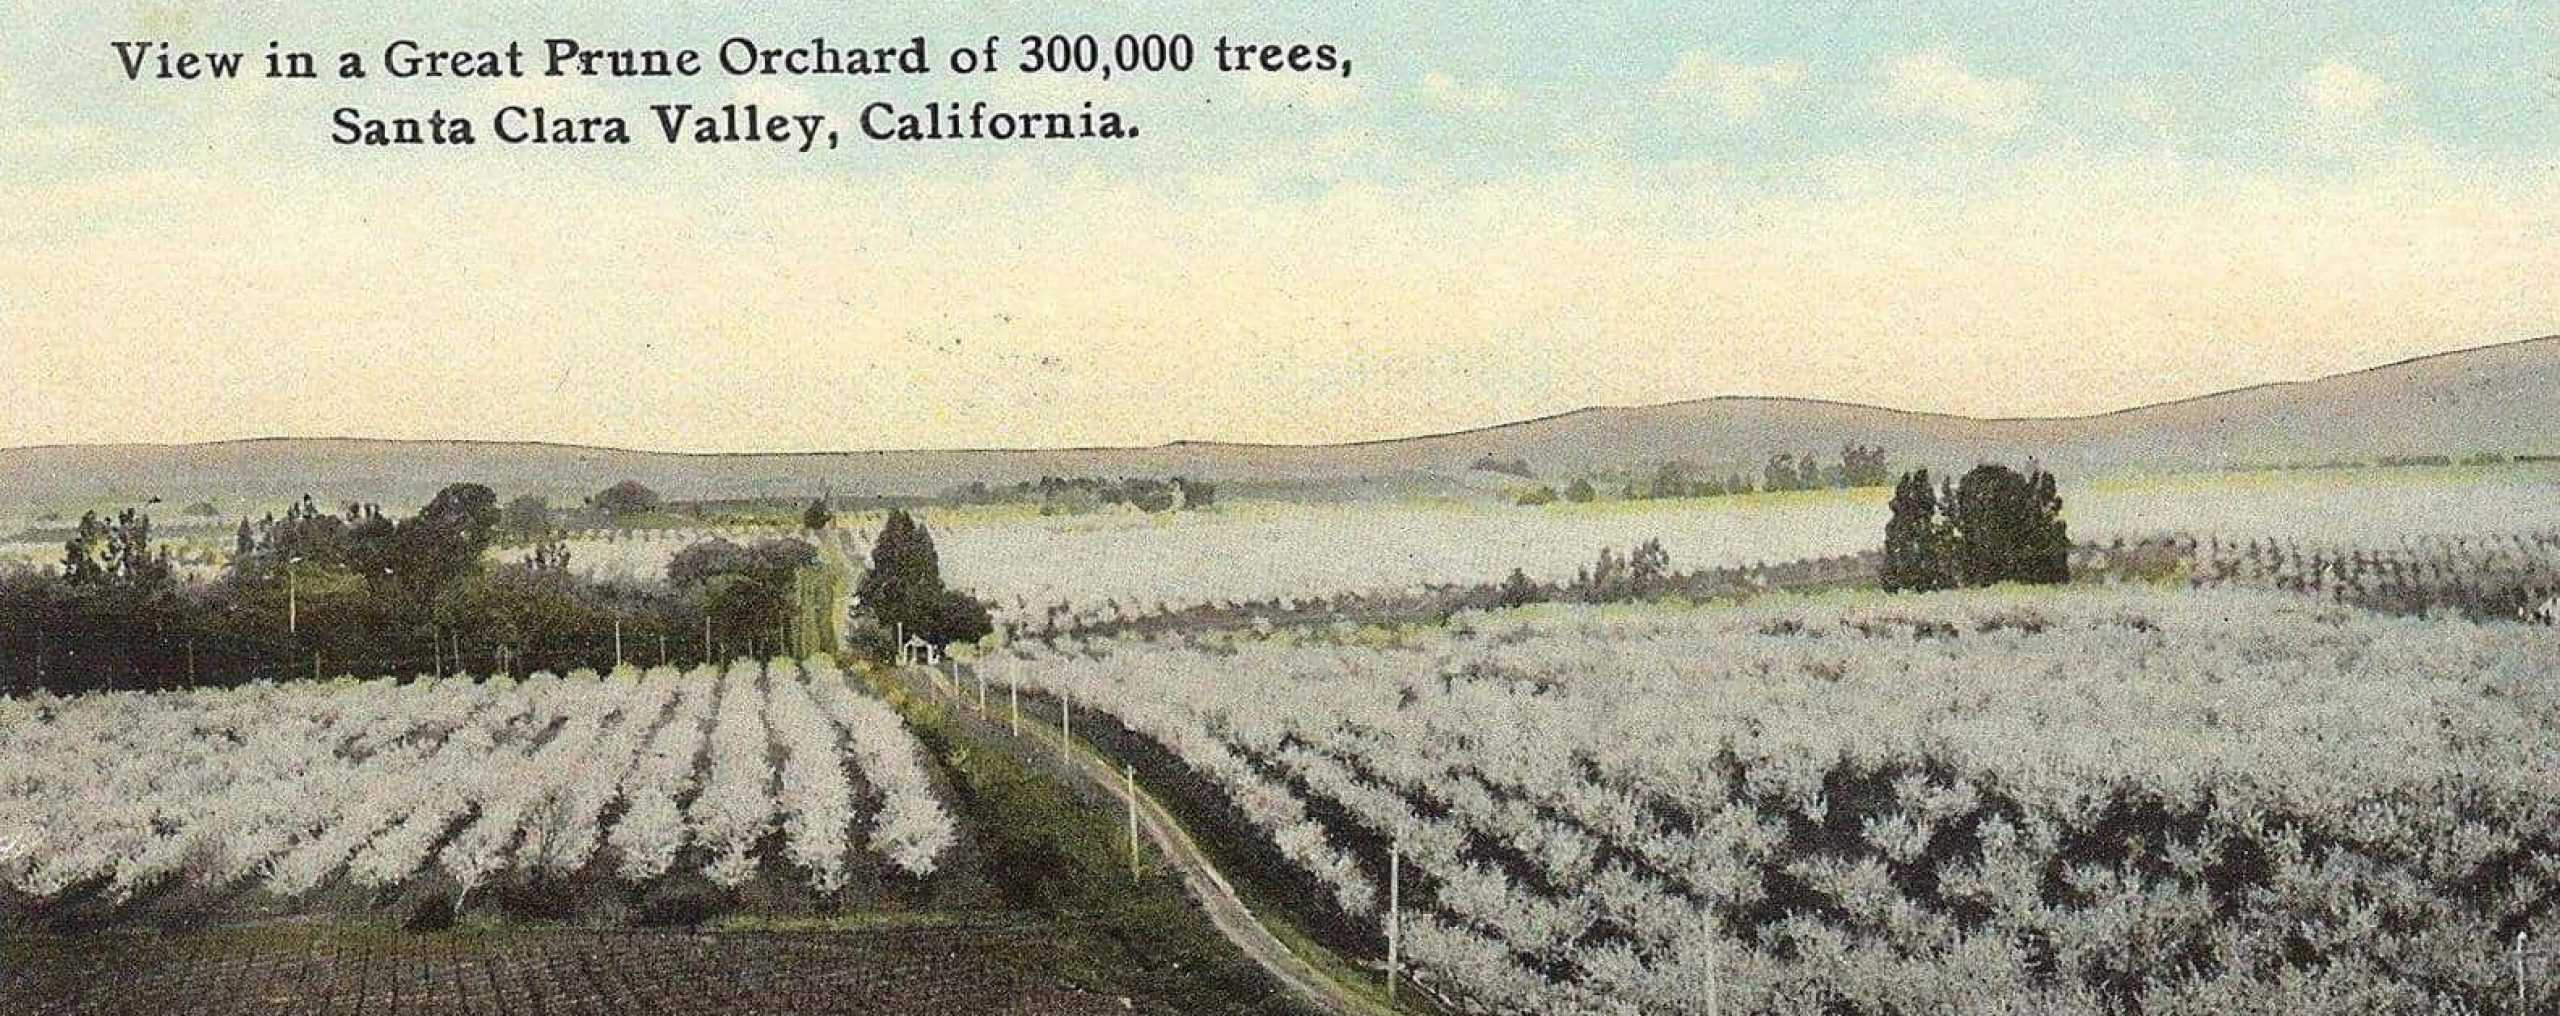 drawing of a prune orchard in Santa Clara Valley